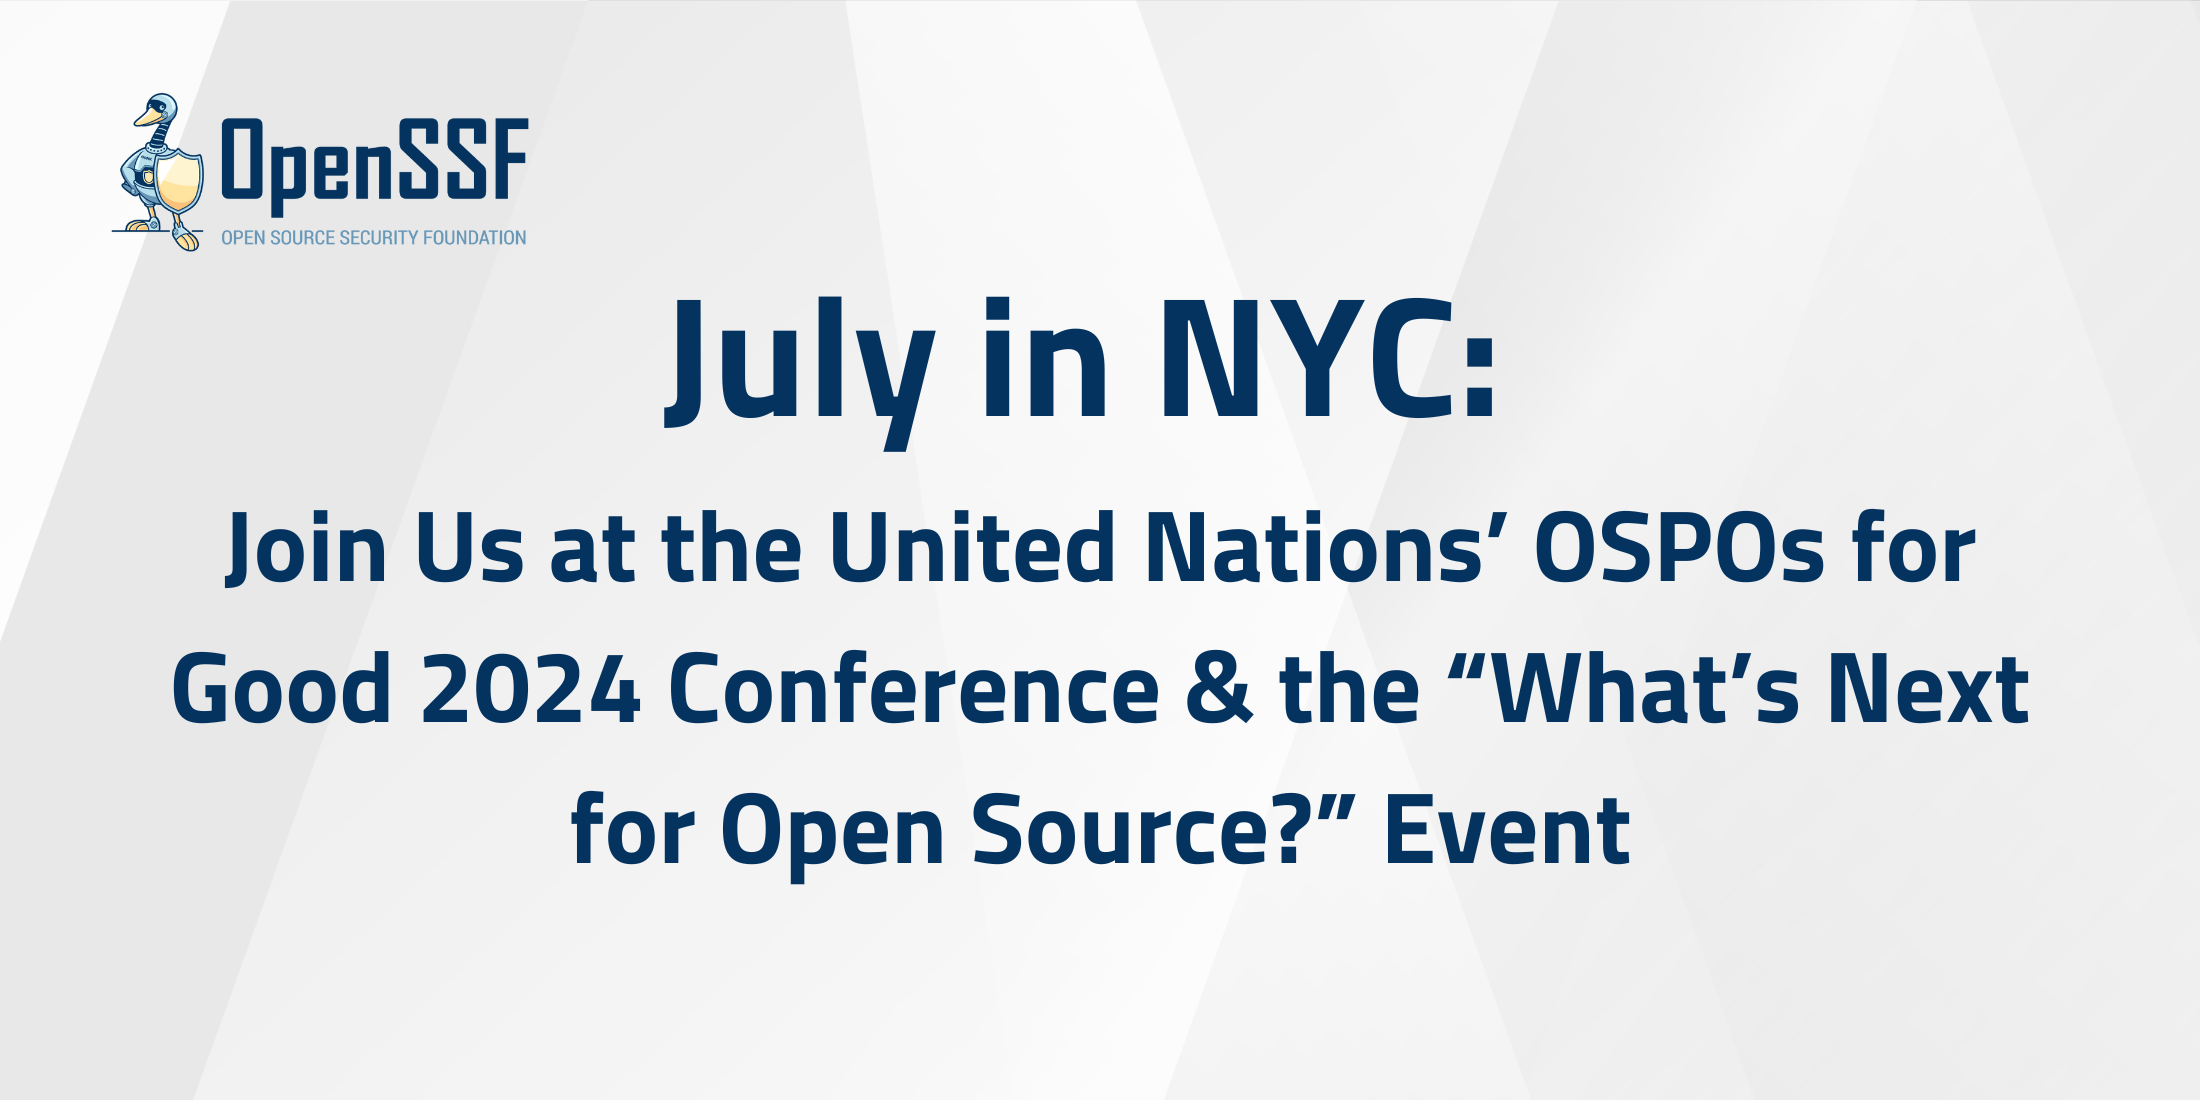 July in NYC: Join Us at the United Nations’ (UN’s) OSPOs for Good 2024 Conference & the “What’s Next for Open Source?” Event